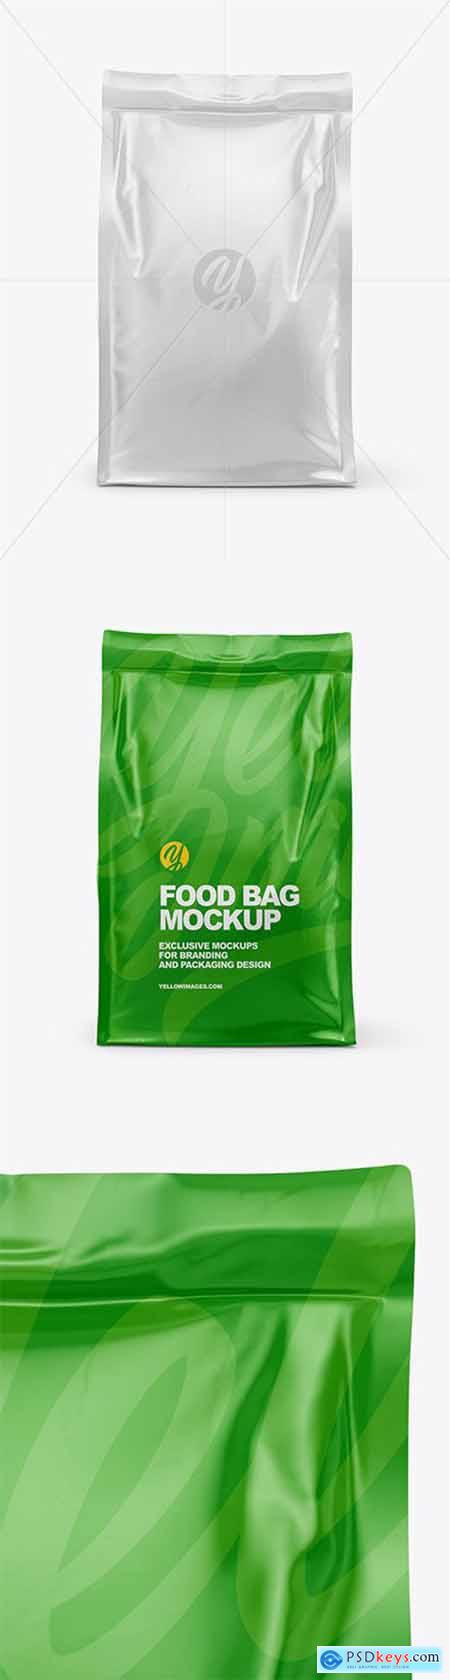 Download Glossy Food Bag Mockup Front View 60620 Free Download Photoshop Vector Stock Image Via Torrent Zippyshare From Psdkeys Com